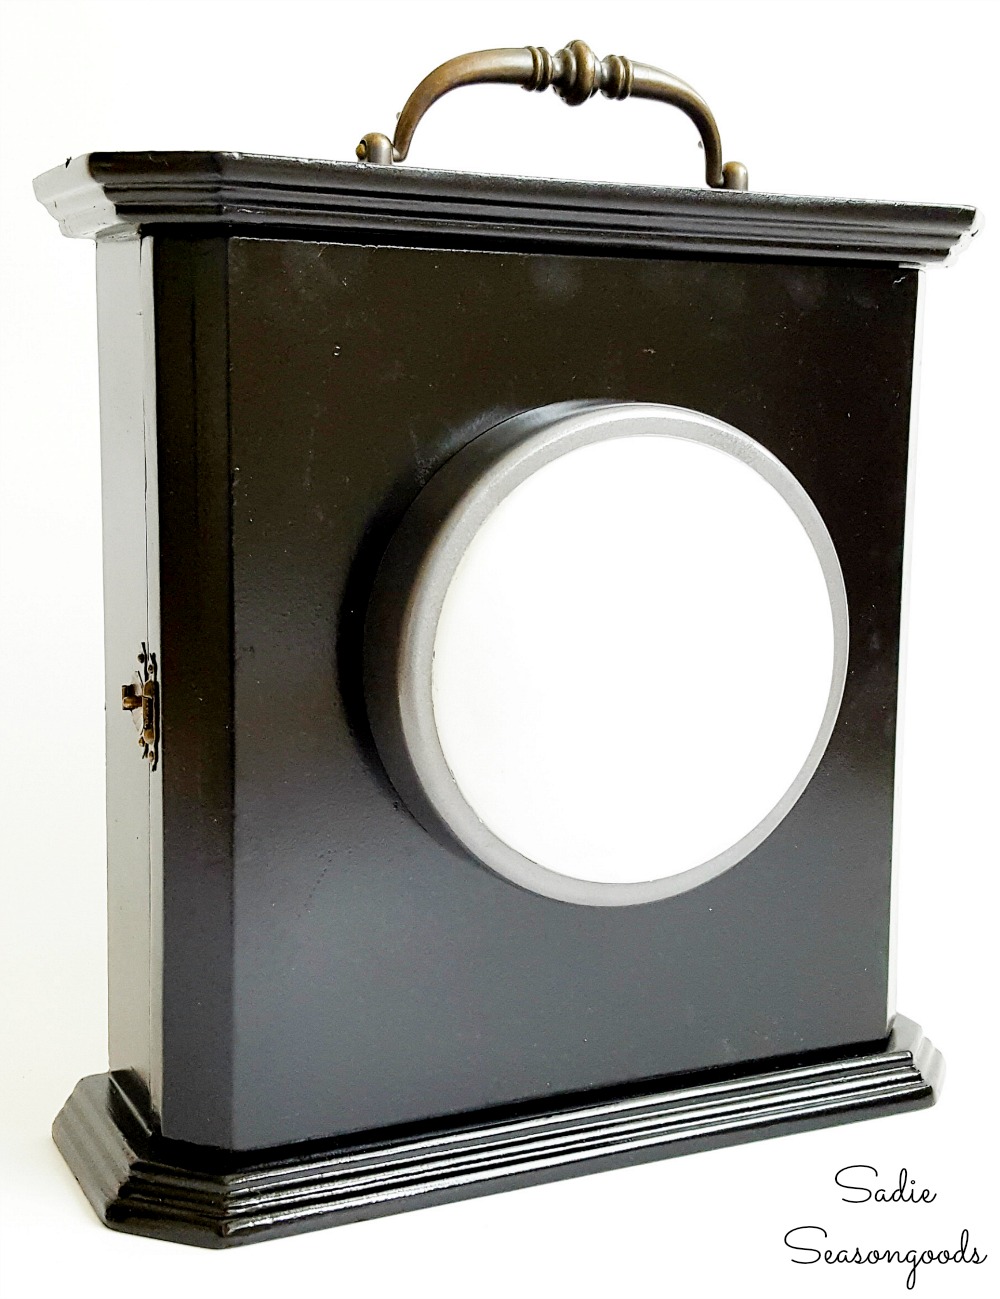 https://www.sadieseasongoods.com/wp-content/uploads/2017/08/Blackout-kit-and-emergency-lantern-for-a-power-outage.jpg